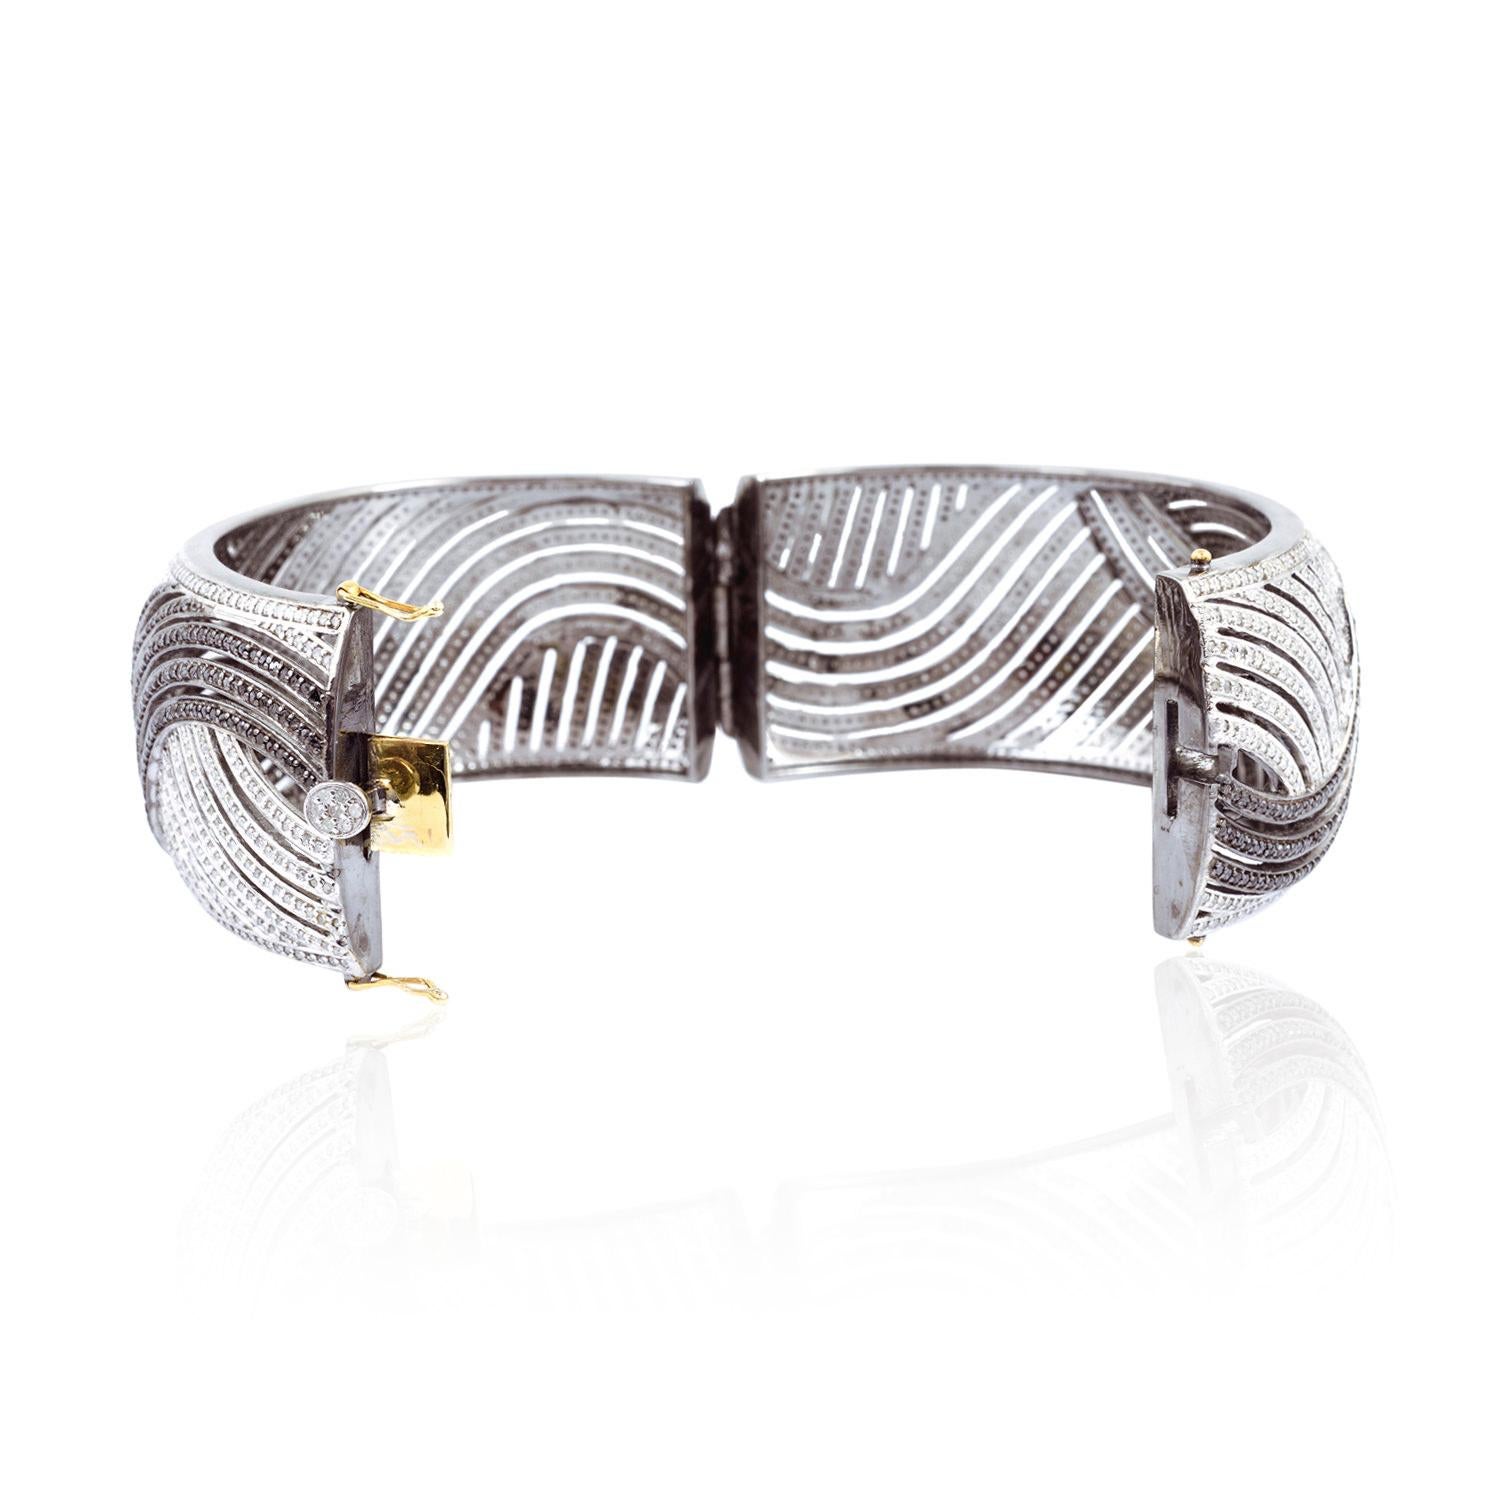 Round Cut Bracelet in Swirl Design With Black & White Diamonds Made in 18k Gold & Silver For Sale